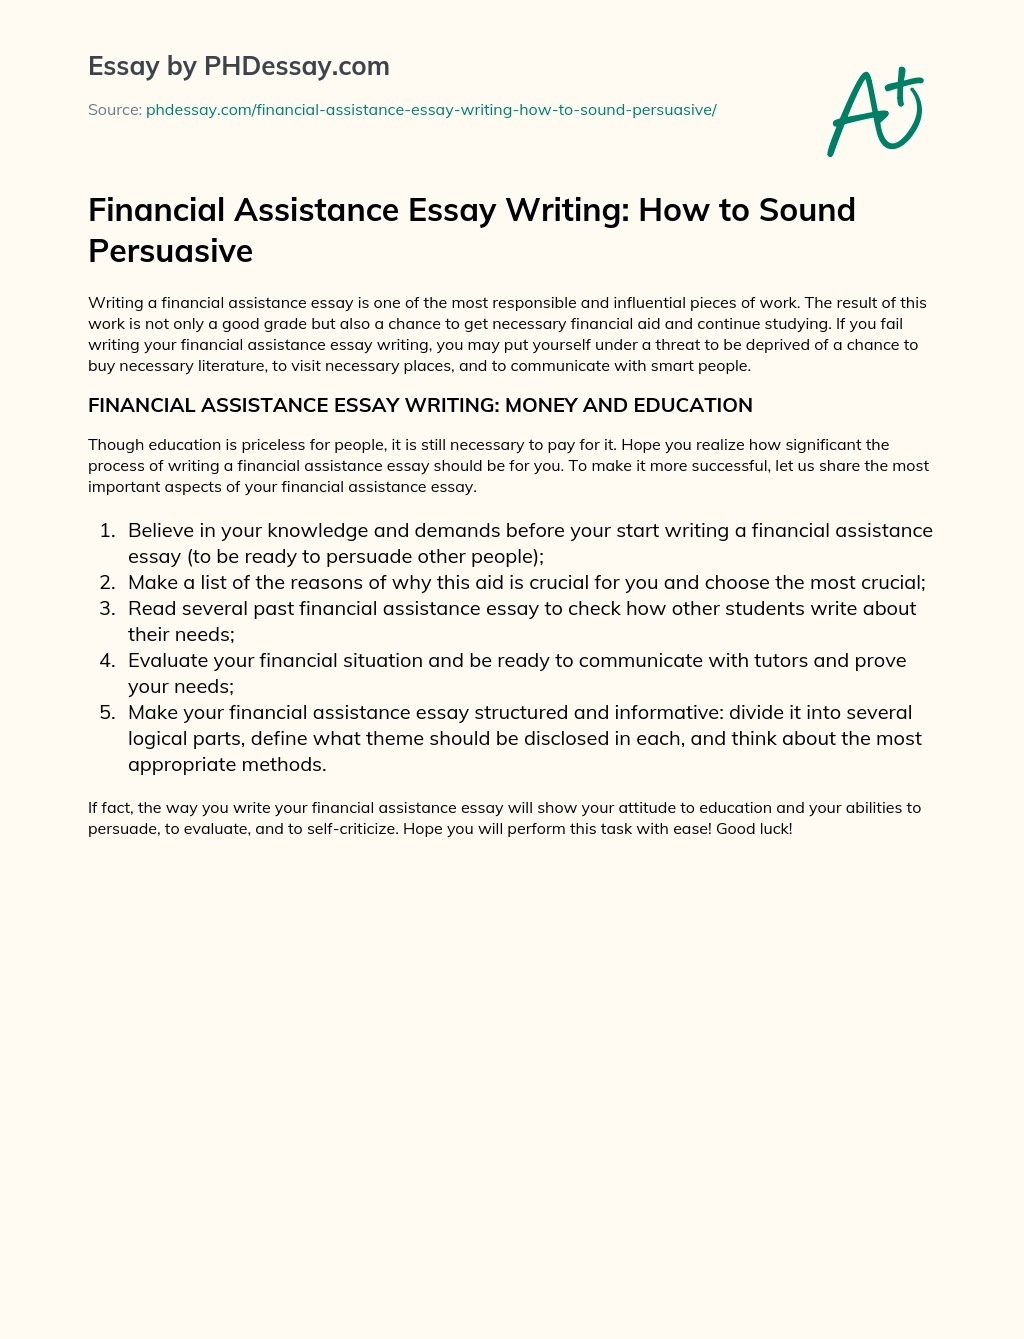 Financial Assistance Essay Writing: How to Sound Persuasive essay